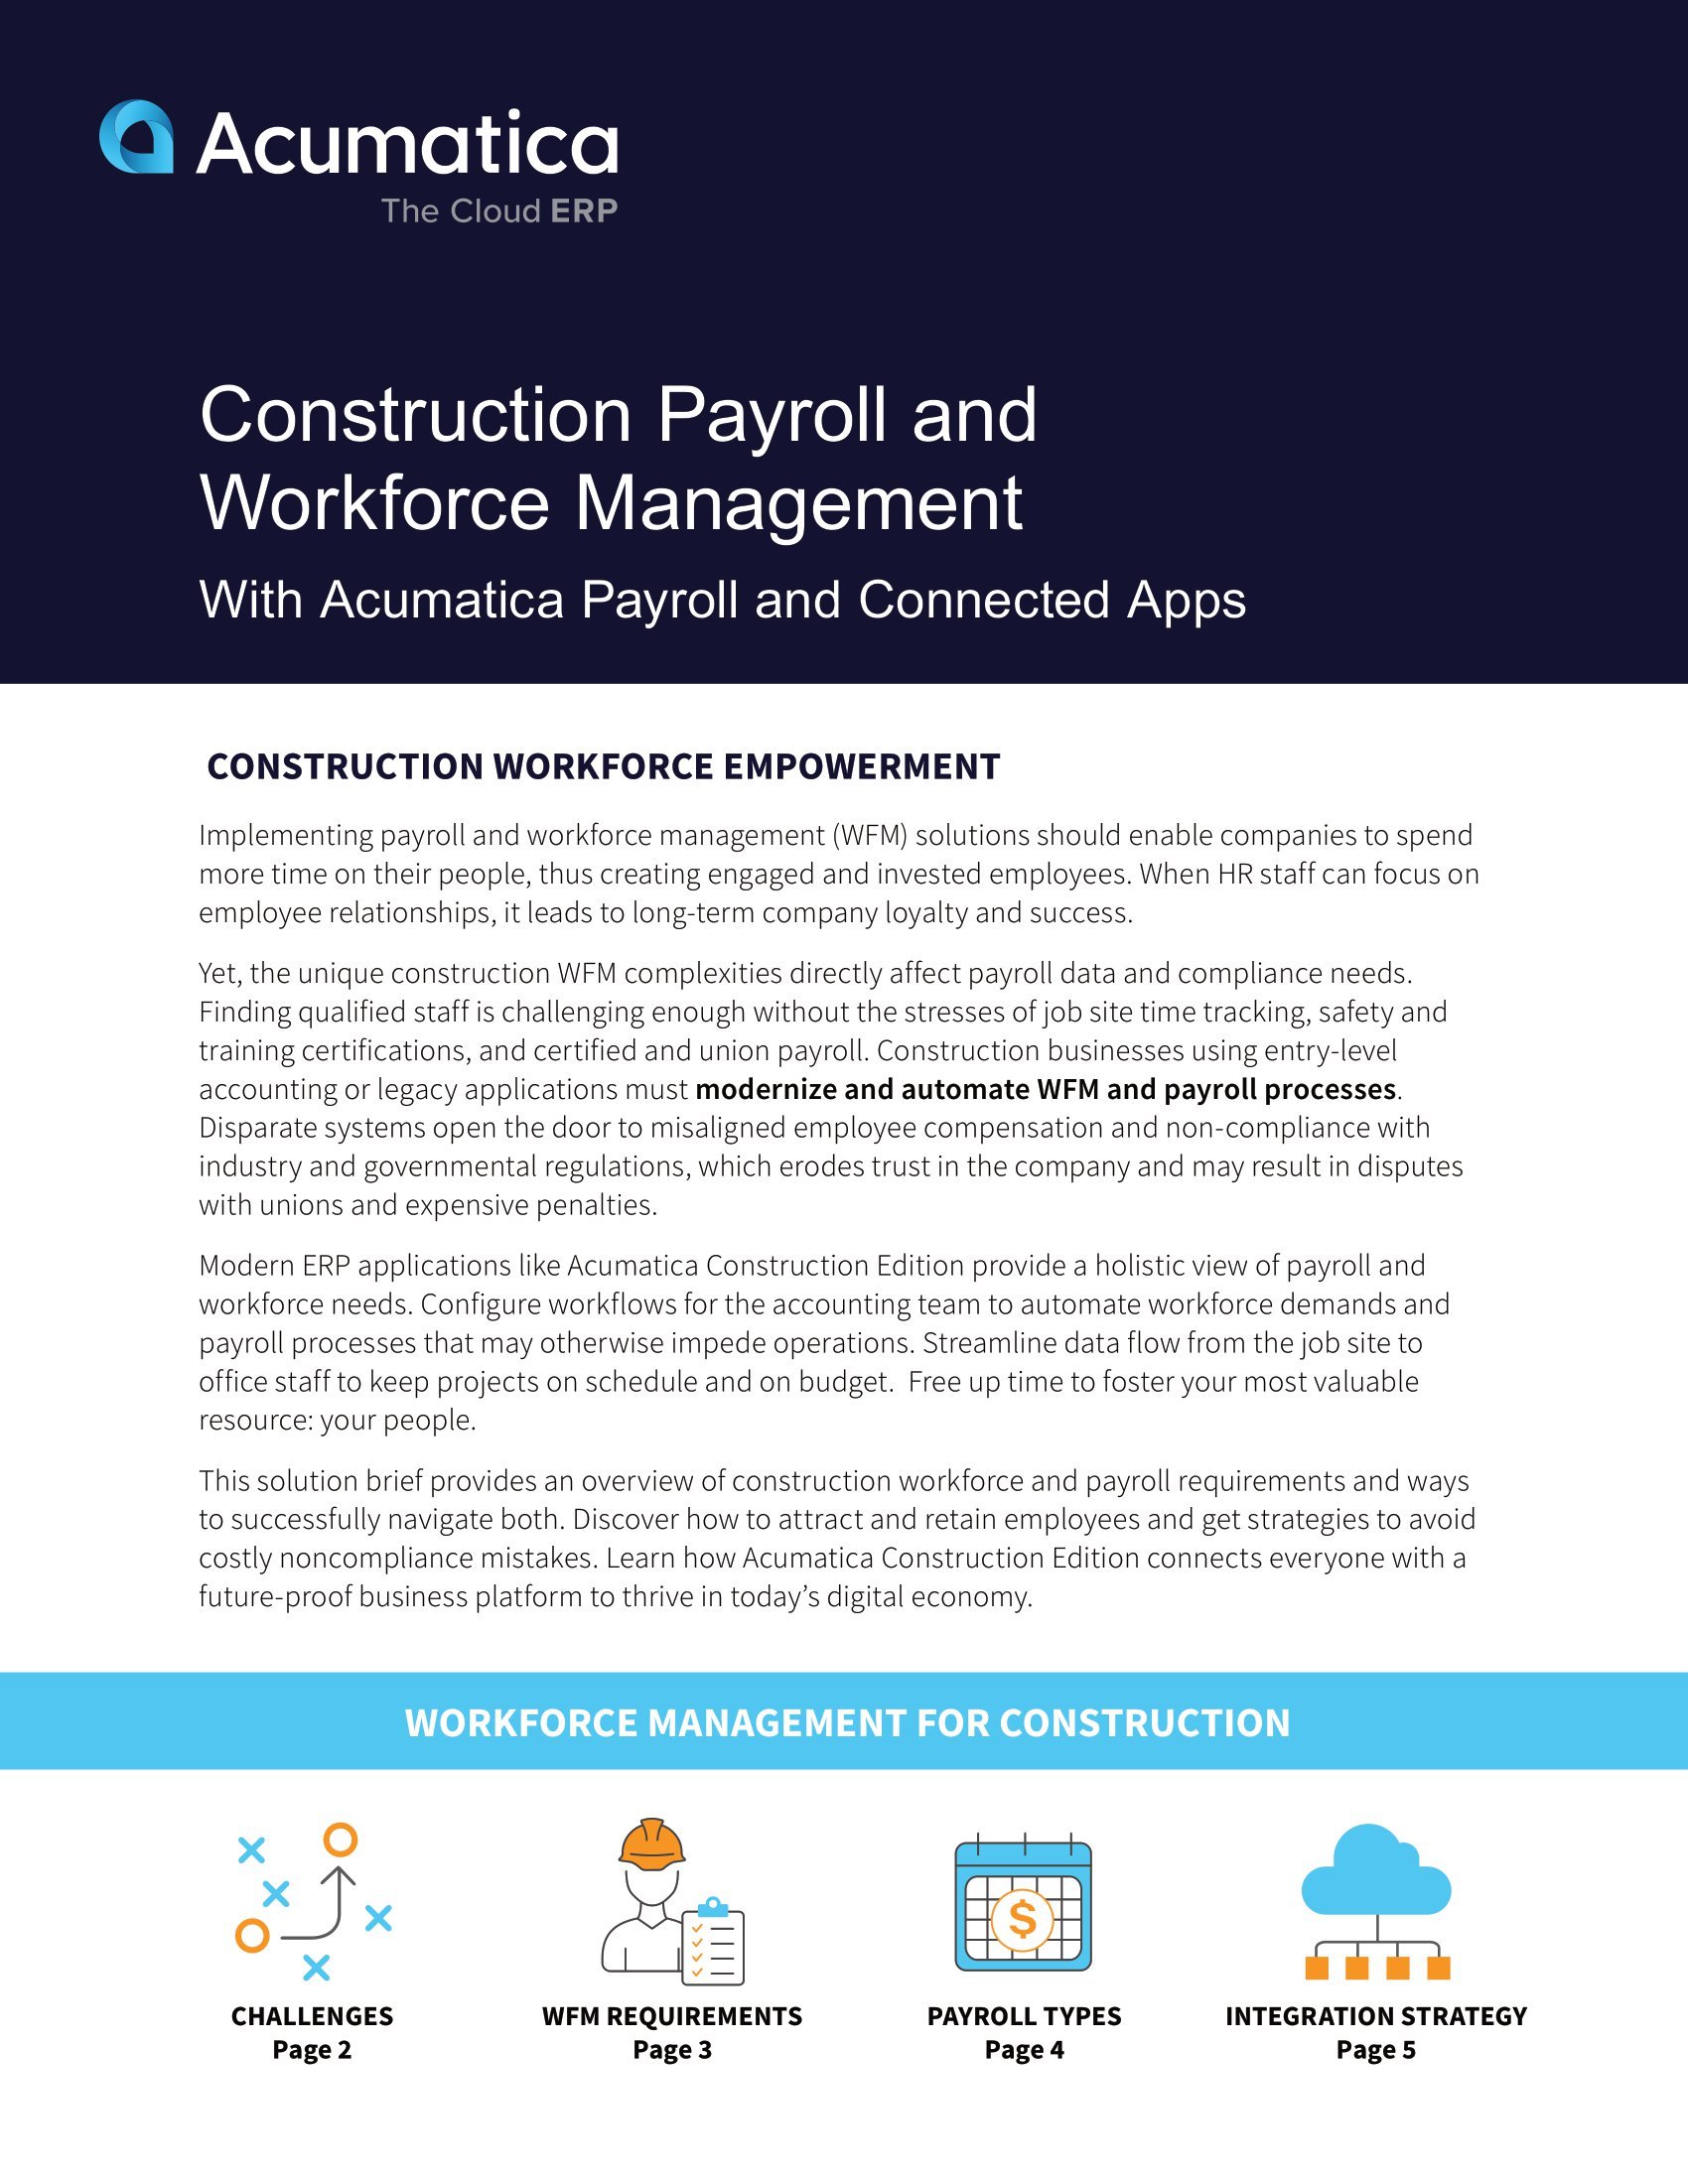 How Acumatica Construction Edition Helps Construction Businesses Overcome Common Workforce and Payroll Challenges